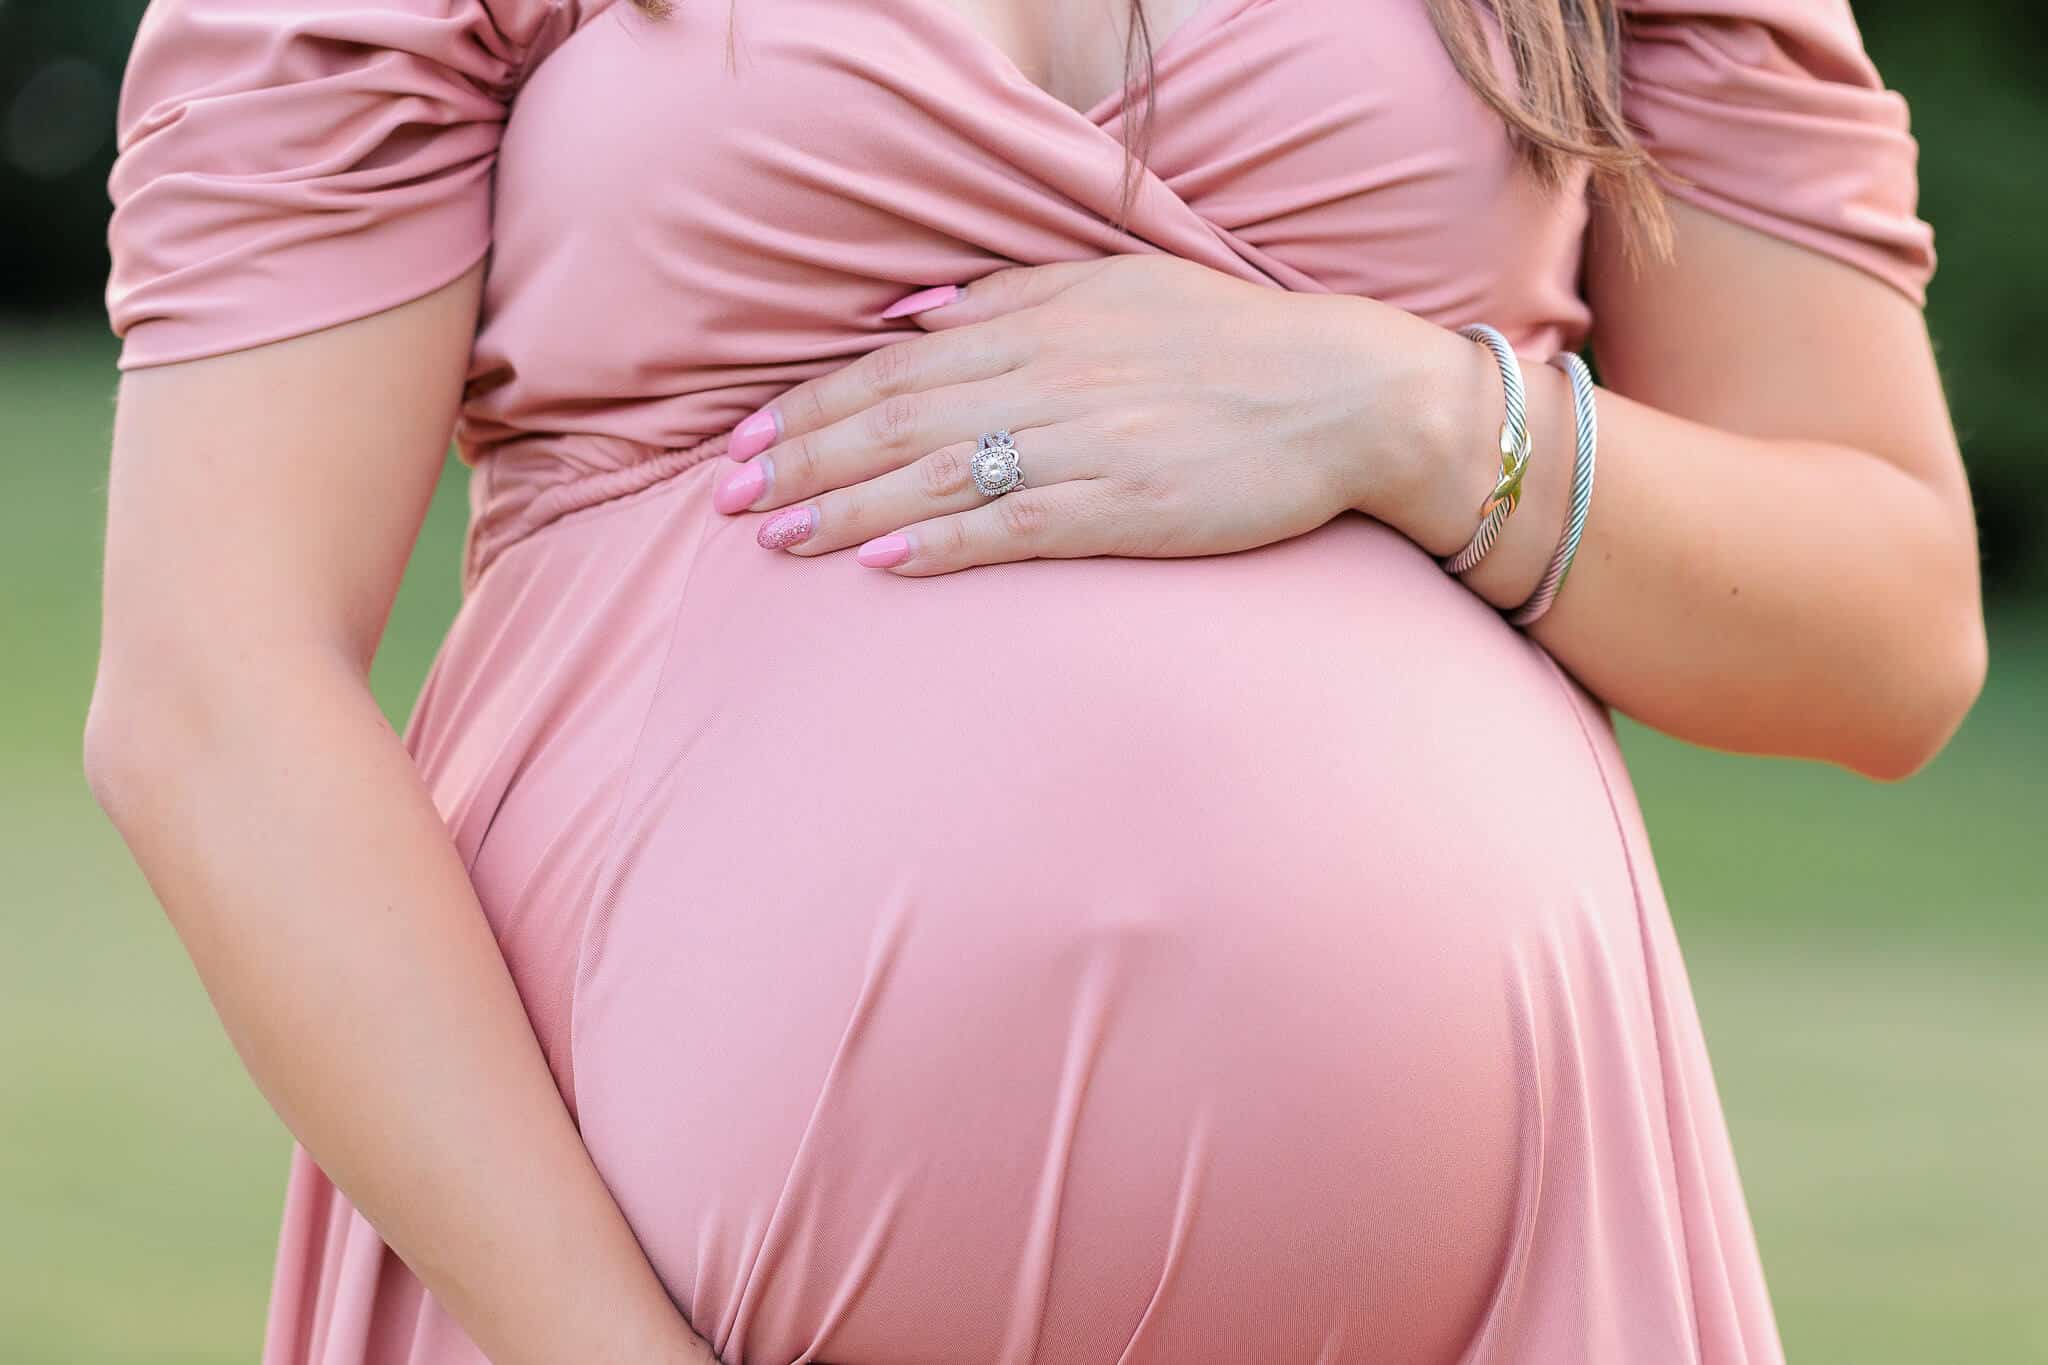 A blog post about PeekABoo 3D Ultrasound in Fredericksburg, Virginia featuring a photo of a woman's pregnant belly in a pink dress.